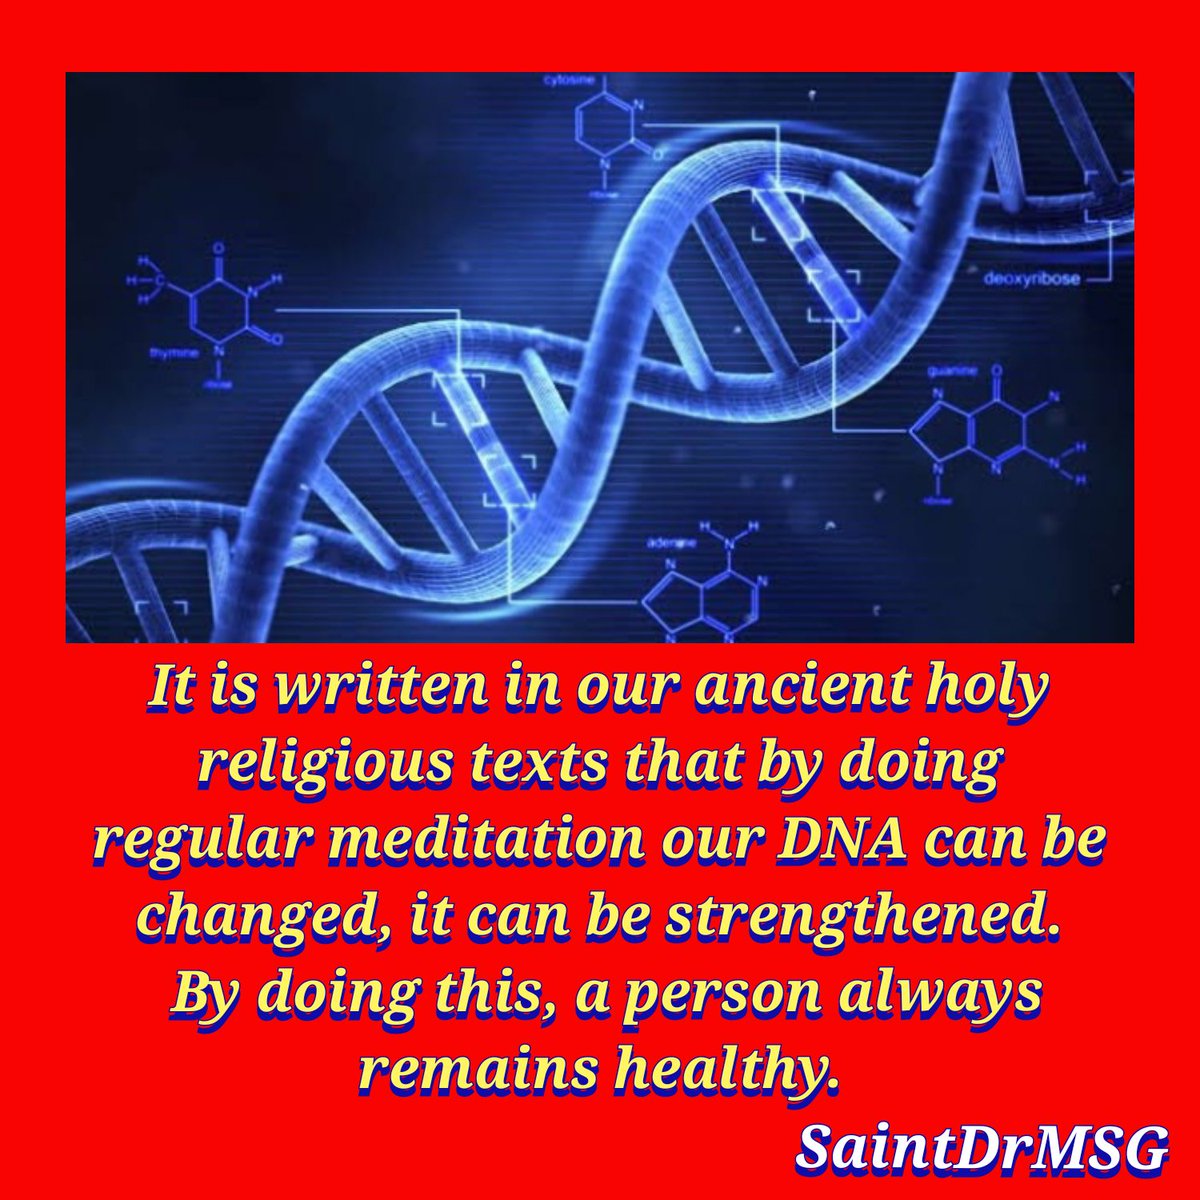 Our DNA has the special ability for physical and mental health.
Meditation is the only technique that can enhance our DNA to the highest level.
#BoostYourDNA
#StrengthenDNA #DNA_ThePowerhouse
#DNA_PowerOfSoul
#EnhanceDNA 
#PowerOfMeditation #SaintDrMSG 
#DeraSachaSauda